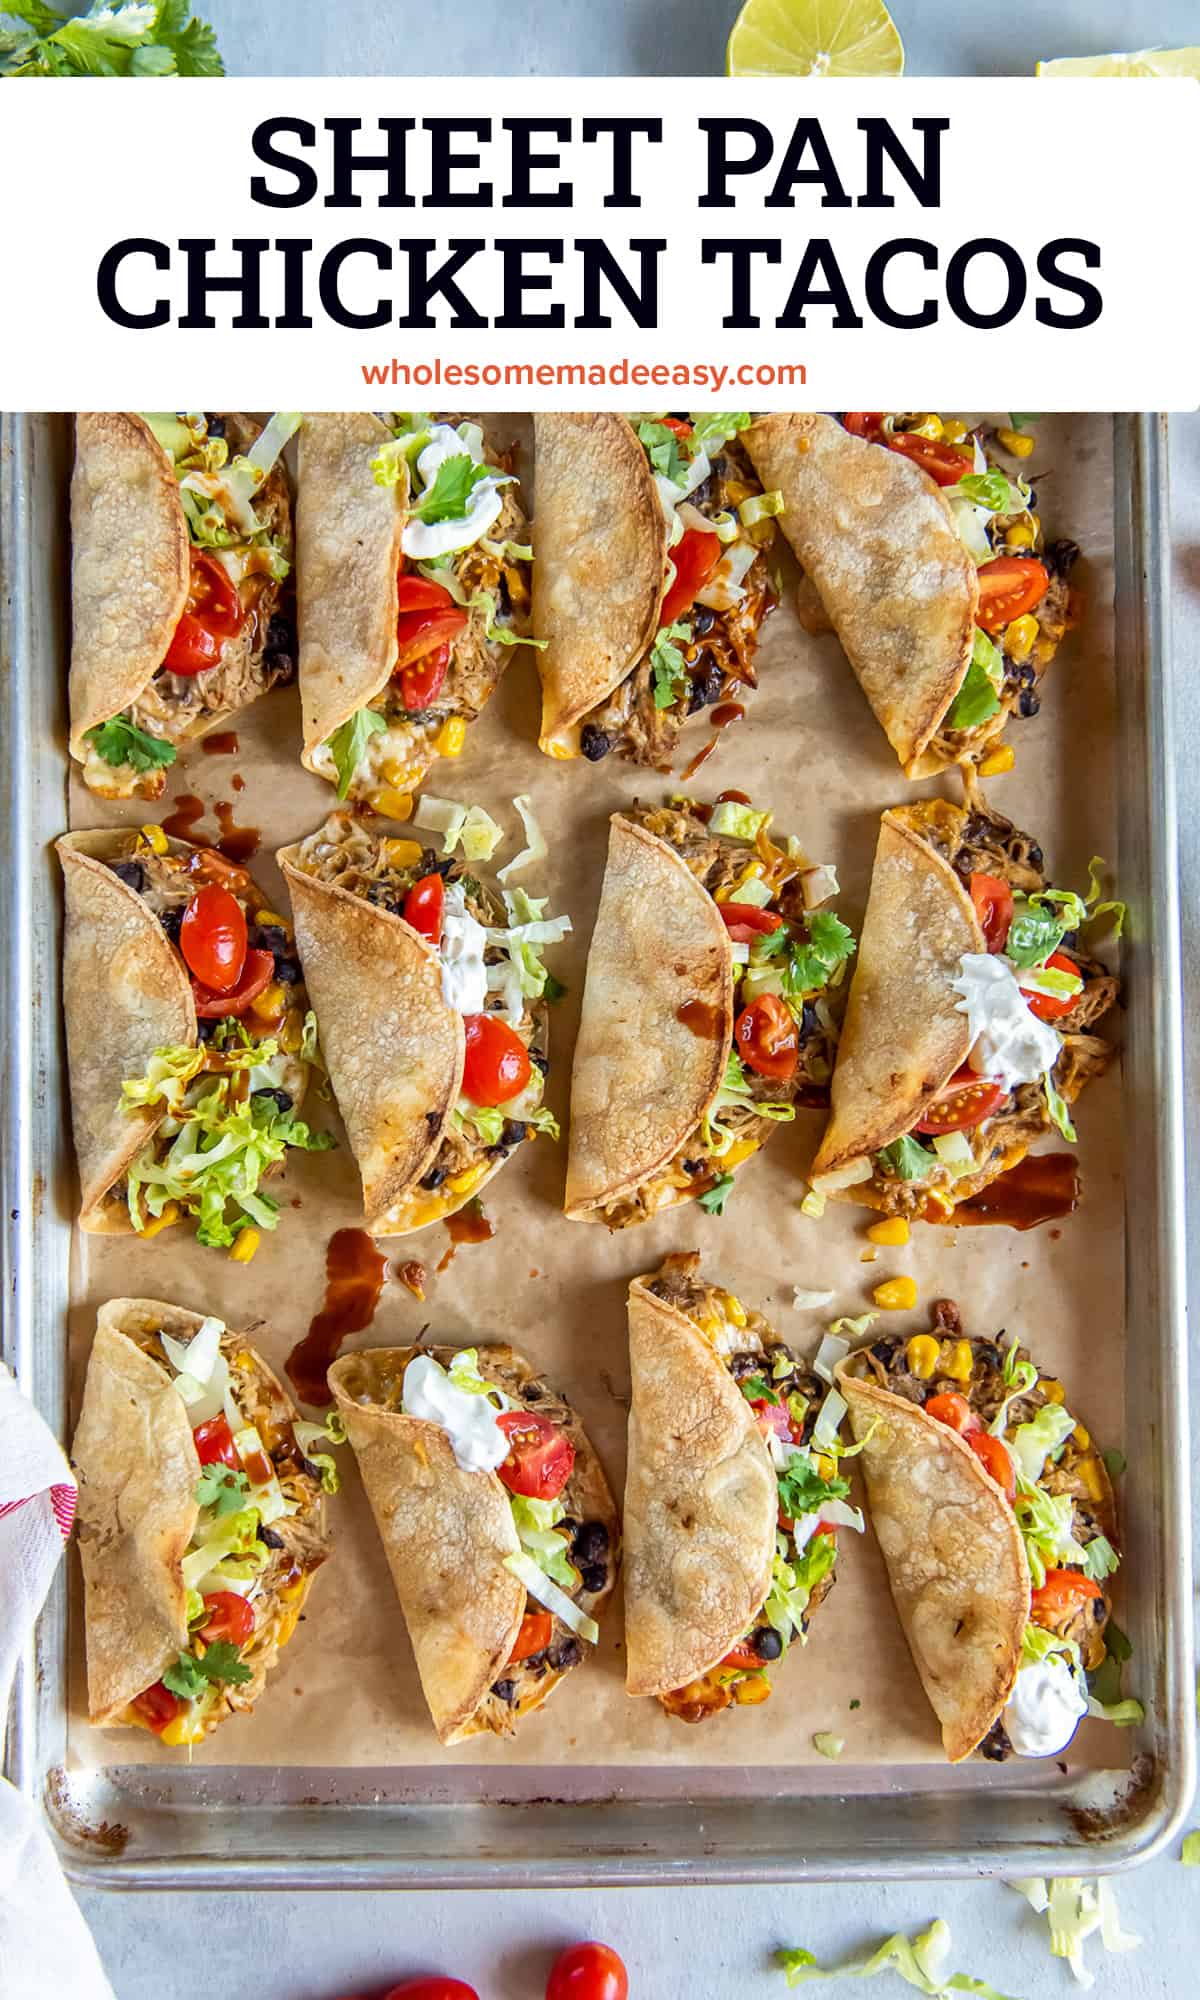 A sheet pan full of chicken tacos filled with lettuce, tomatoes, and sour cream with text.